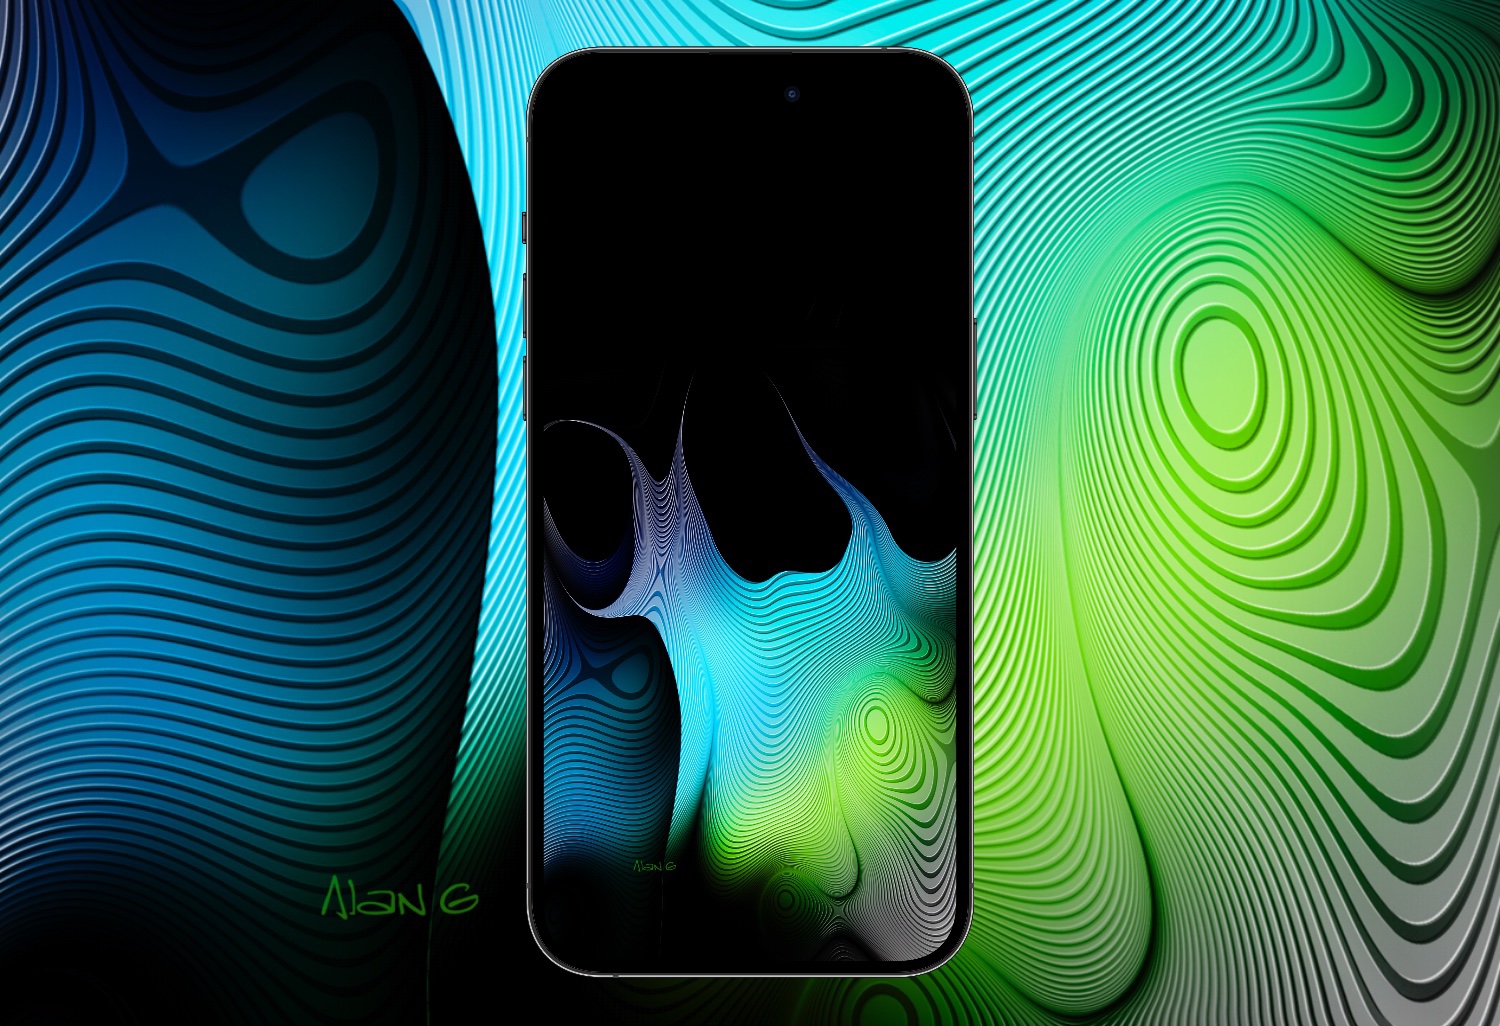 Best iPhone wallpapers hd abstract